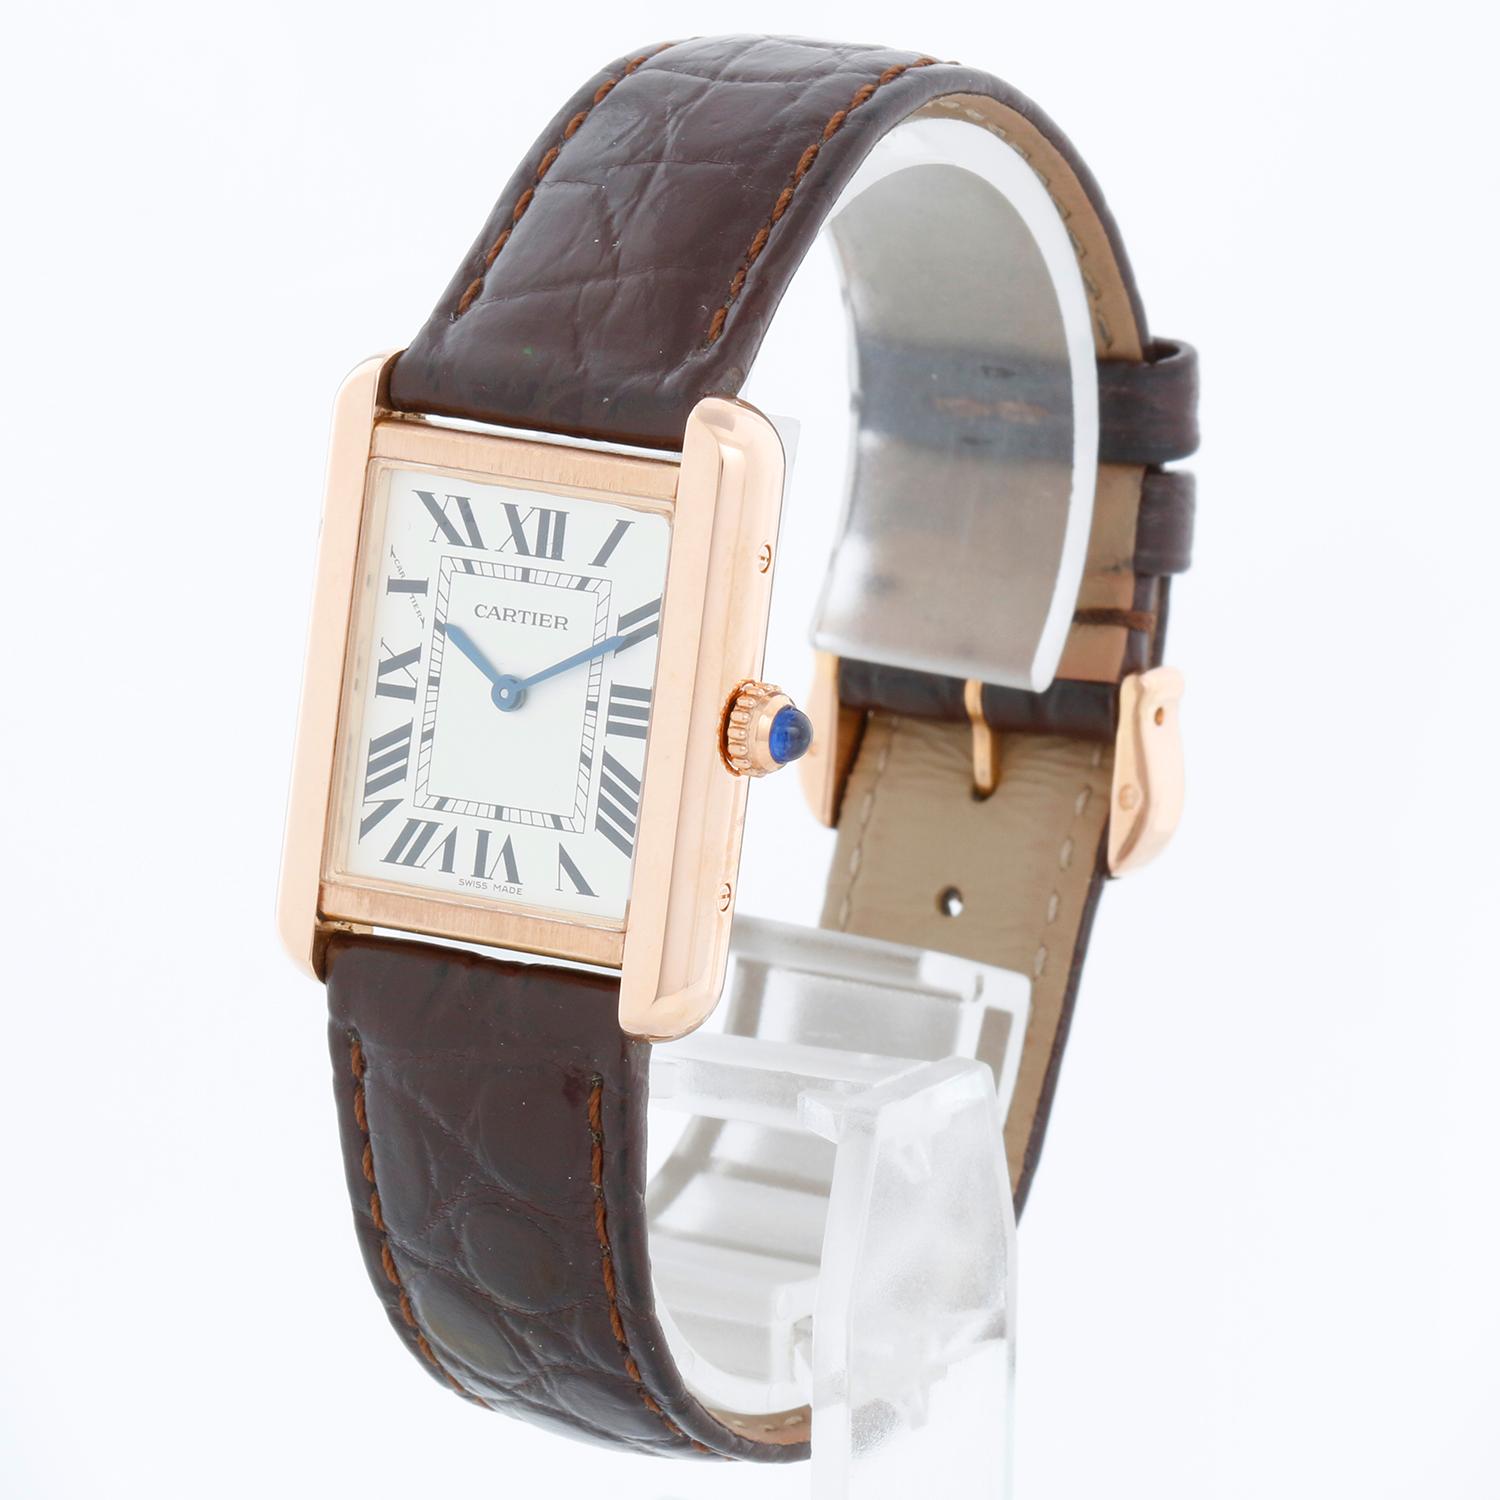 Cartier Tank Solo 18K Rose Gold Ladies Watch W5200024 3168 - Quartz movement. 18k rose gold case with stainless steel back  (24 mm x 31mm). Silver dial with black Roman numerals. Brown  Cartier strap with Cartier rose gold tang buckle. Pre-owned